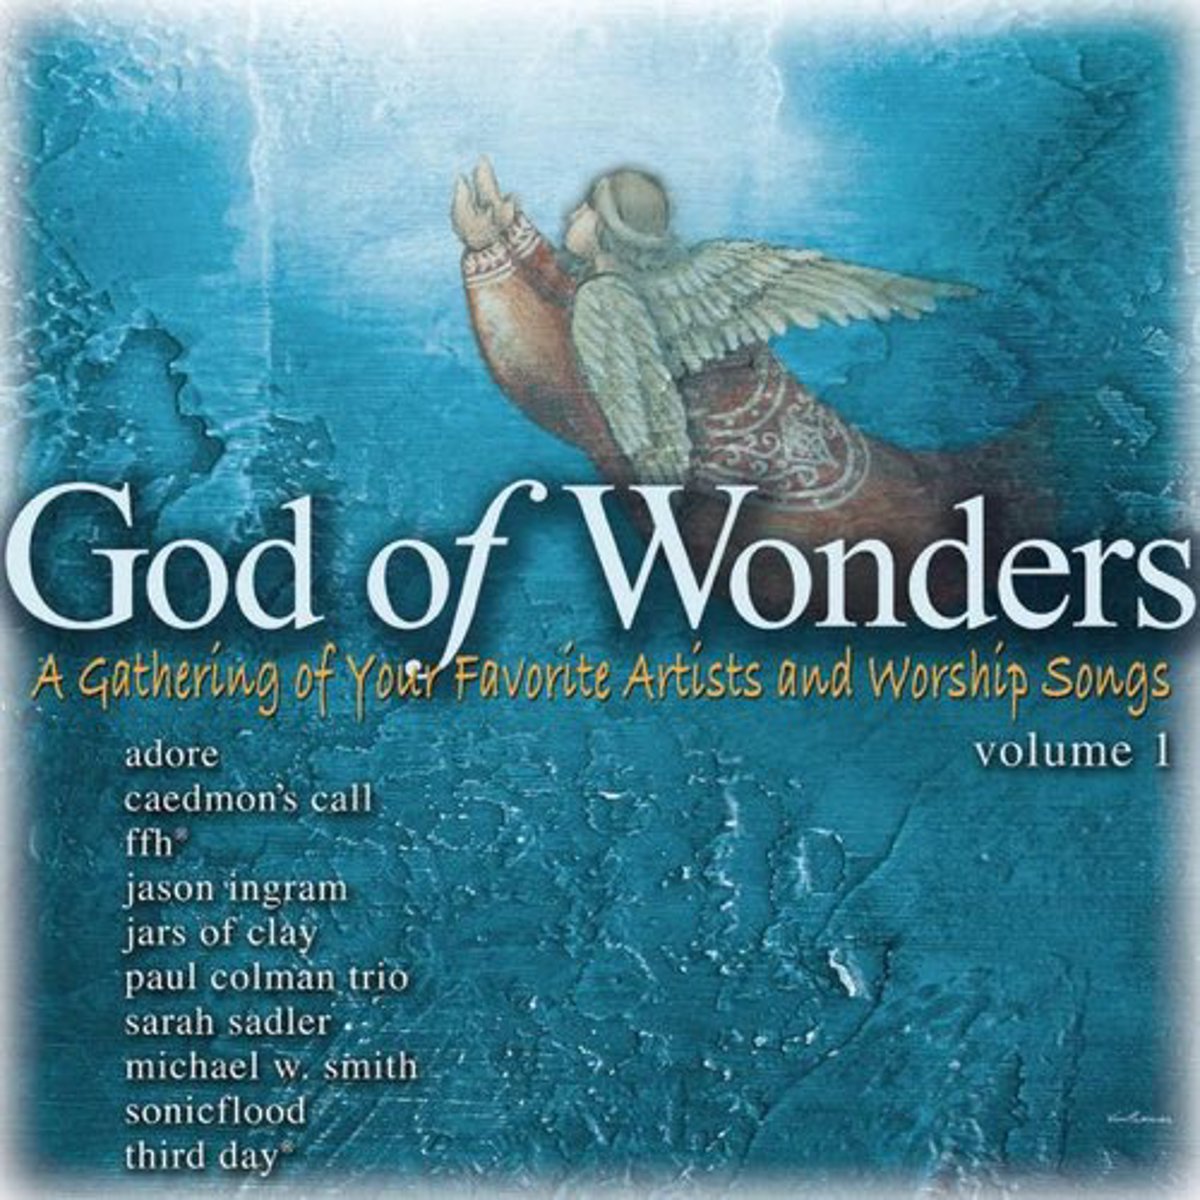 Our God of Wonders, Vol. 1